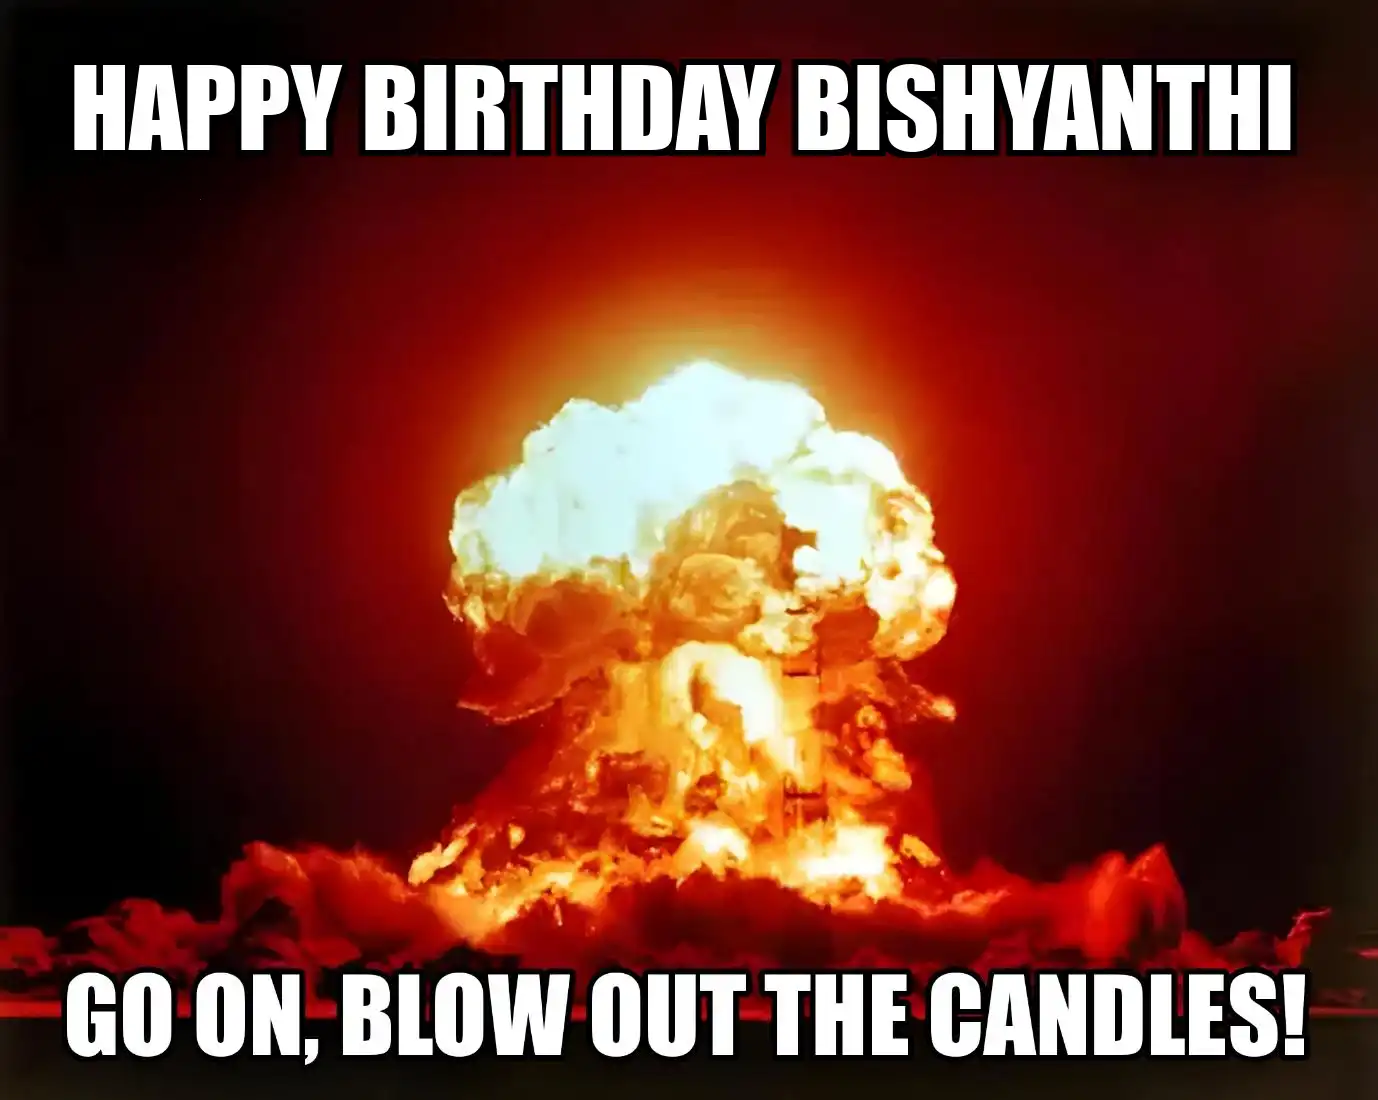 Happy Birthday Bishyanthi Go On Blow Out The Candles Meme